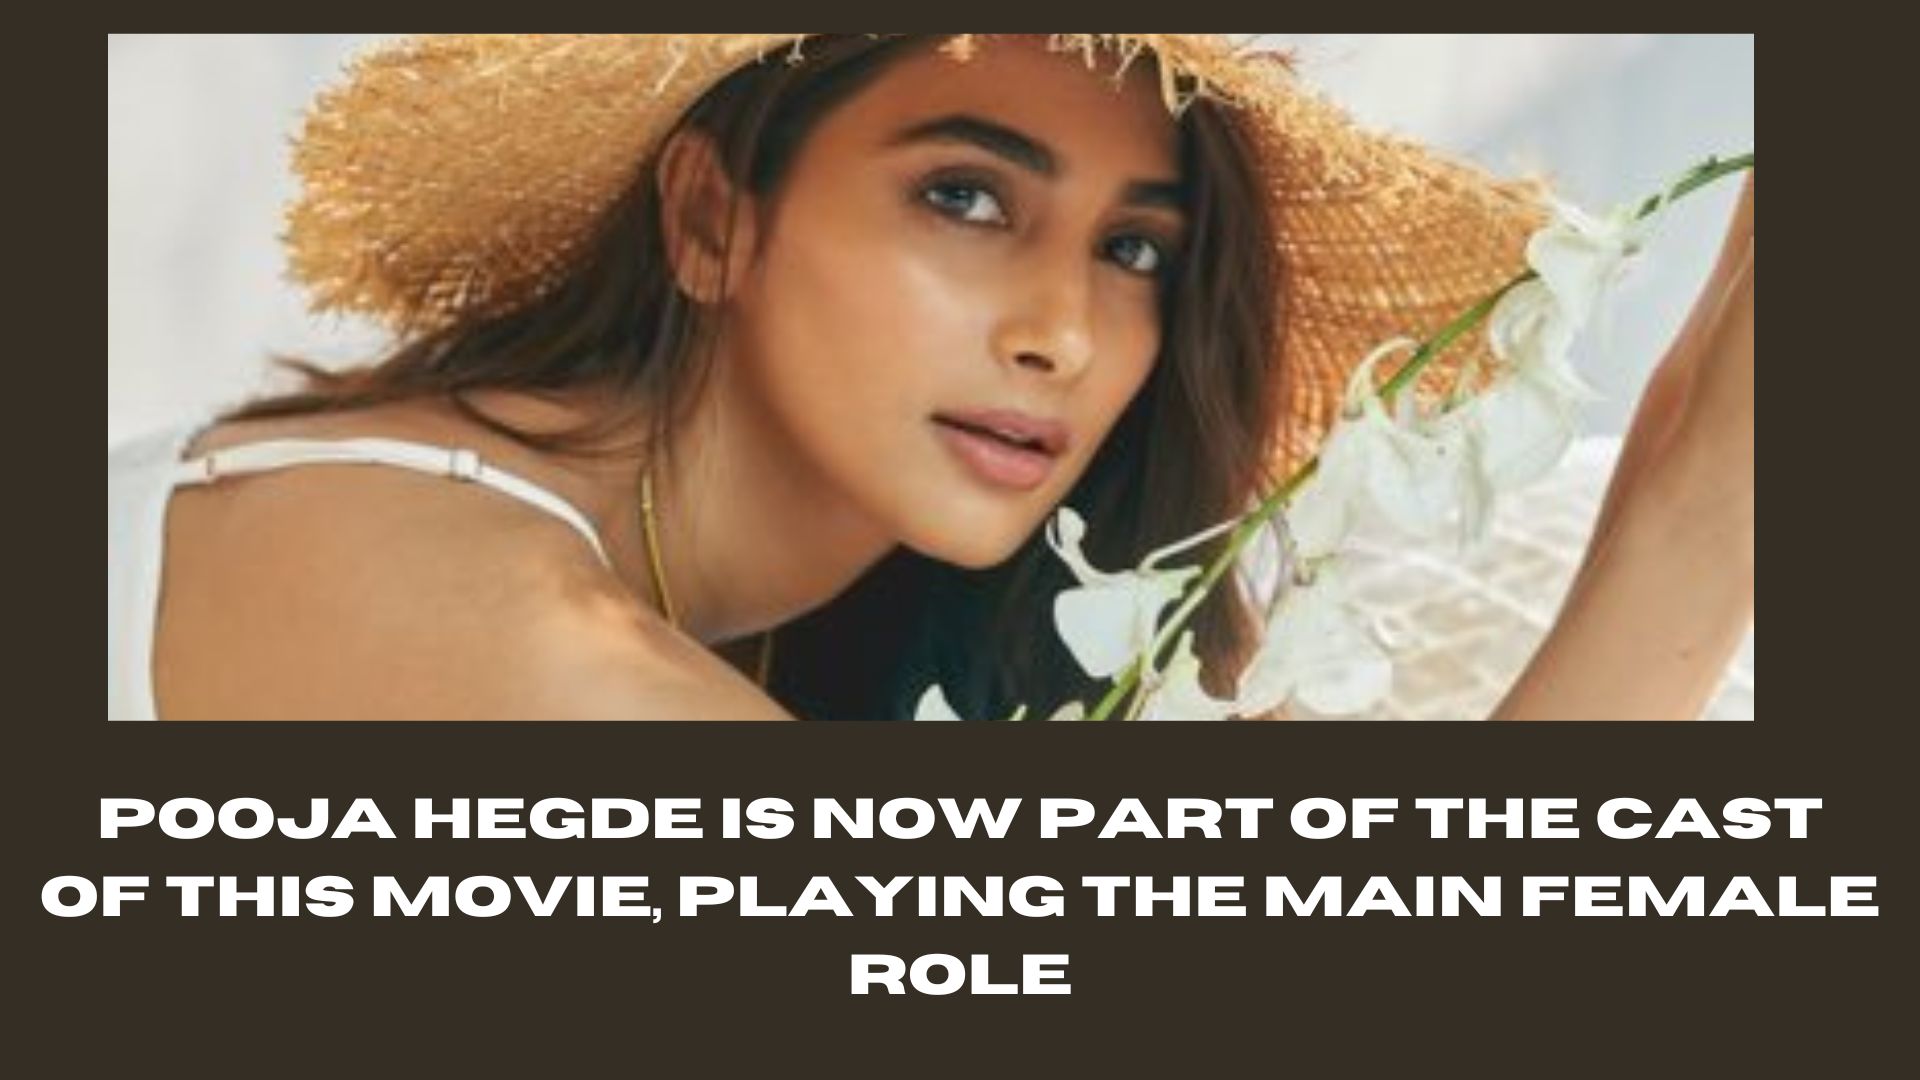 Suriya44 Update: Pooja Hegde is now part of the cast of this movie, playing the main female role.